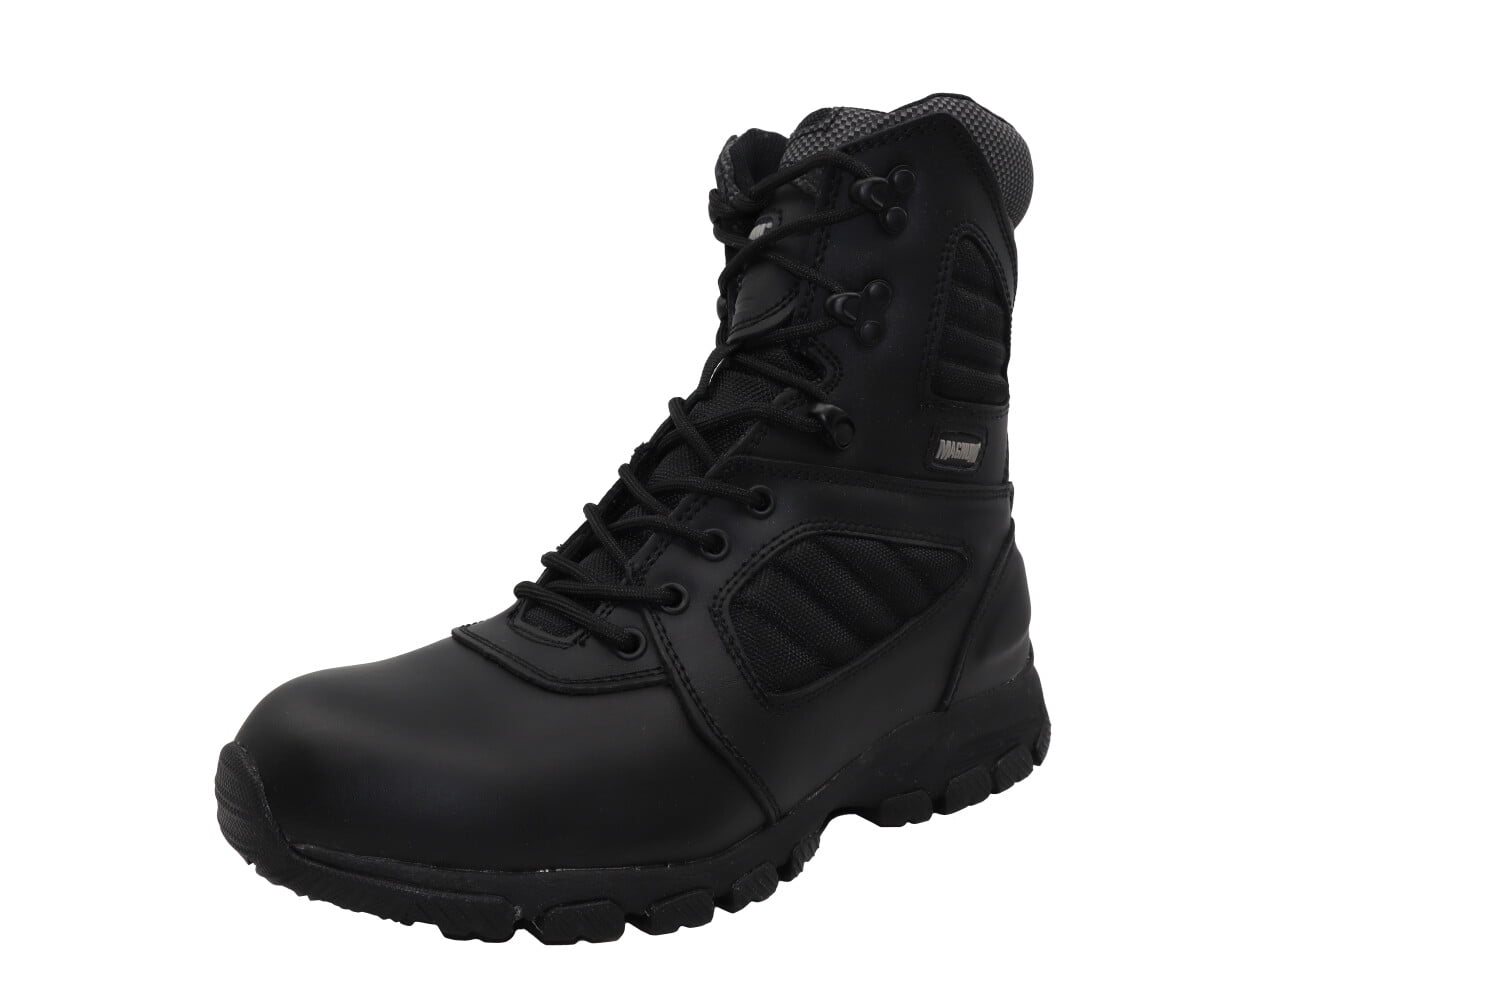 Magnum Mens Response III 8 SZ Waterproof Military and Tactical Boot 